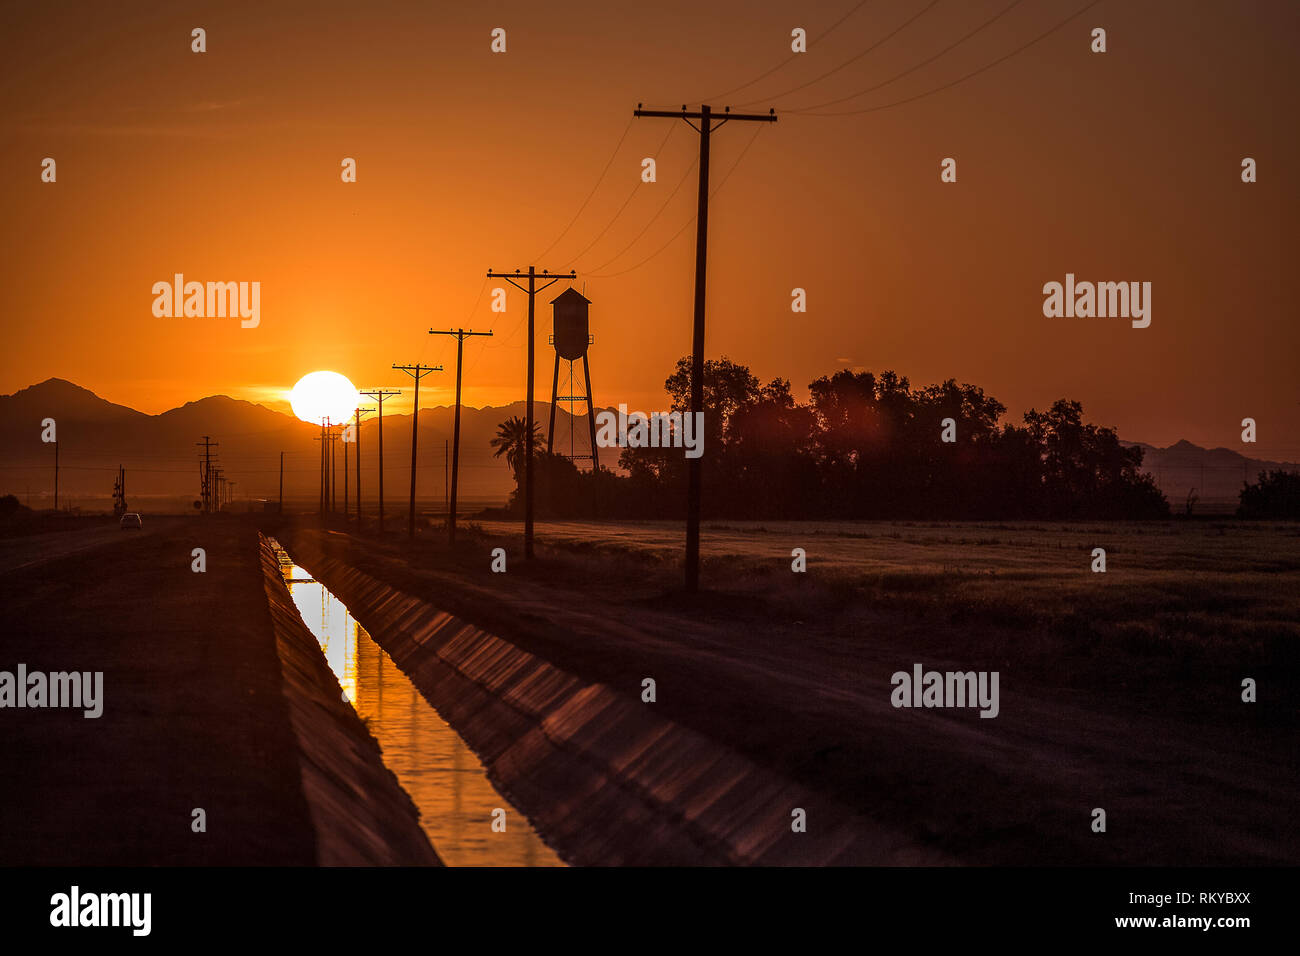 The sun rises behind a mountain and reflecting in an irrigation canal of an agricultural community. Stock Photo